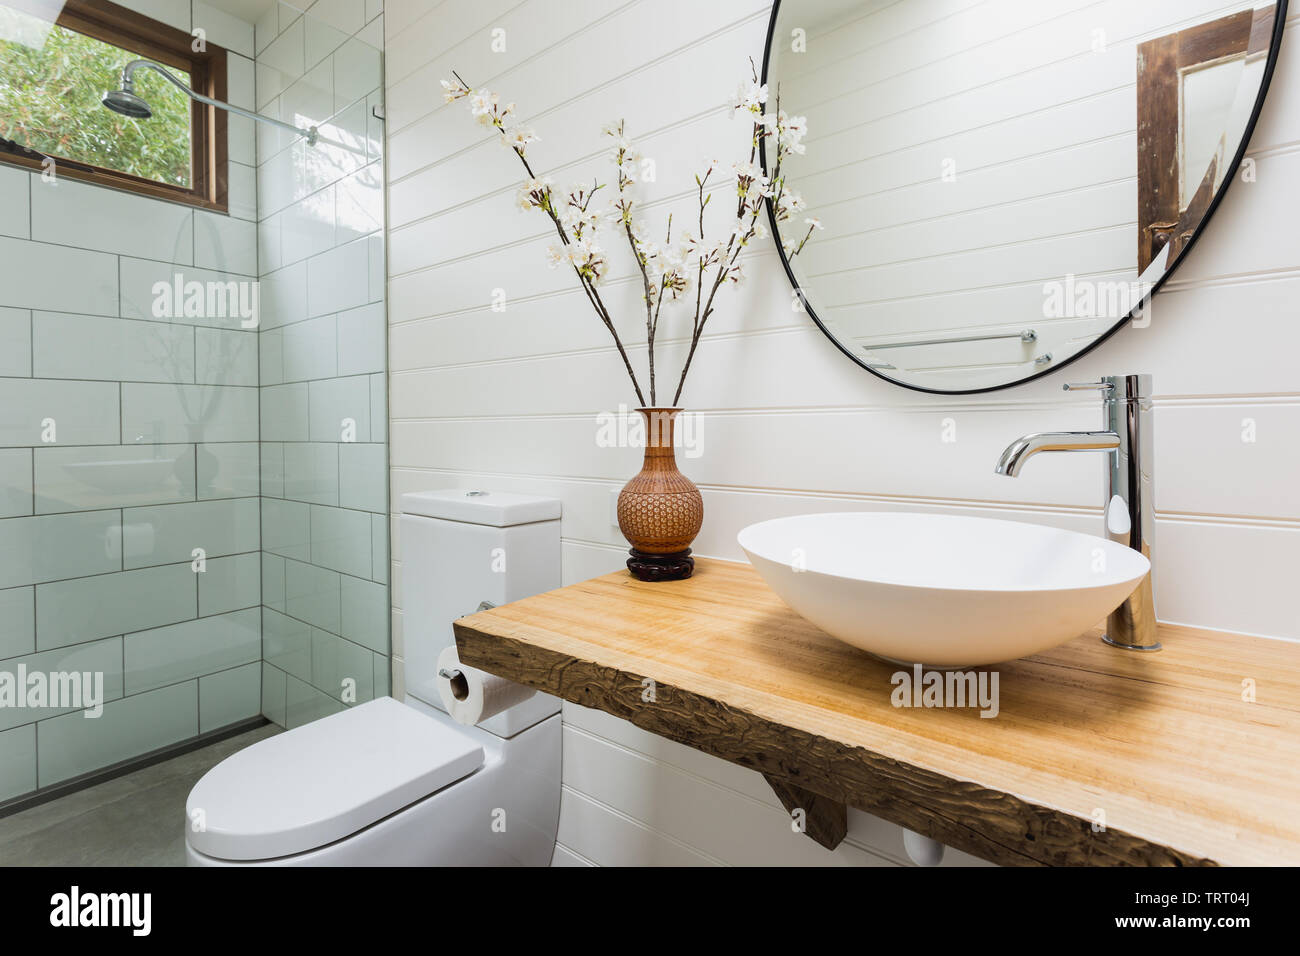 Bathroom including basin, wooden bench top, round black mirror and shower Stock Photo